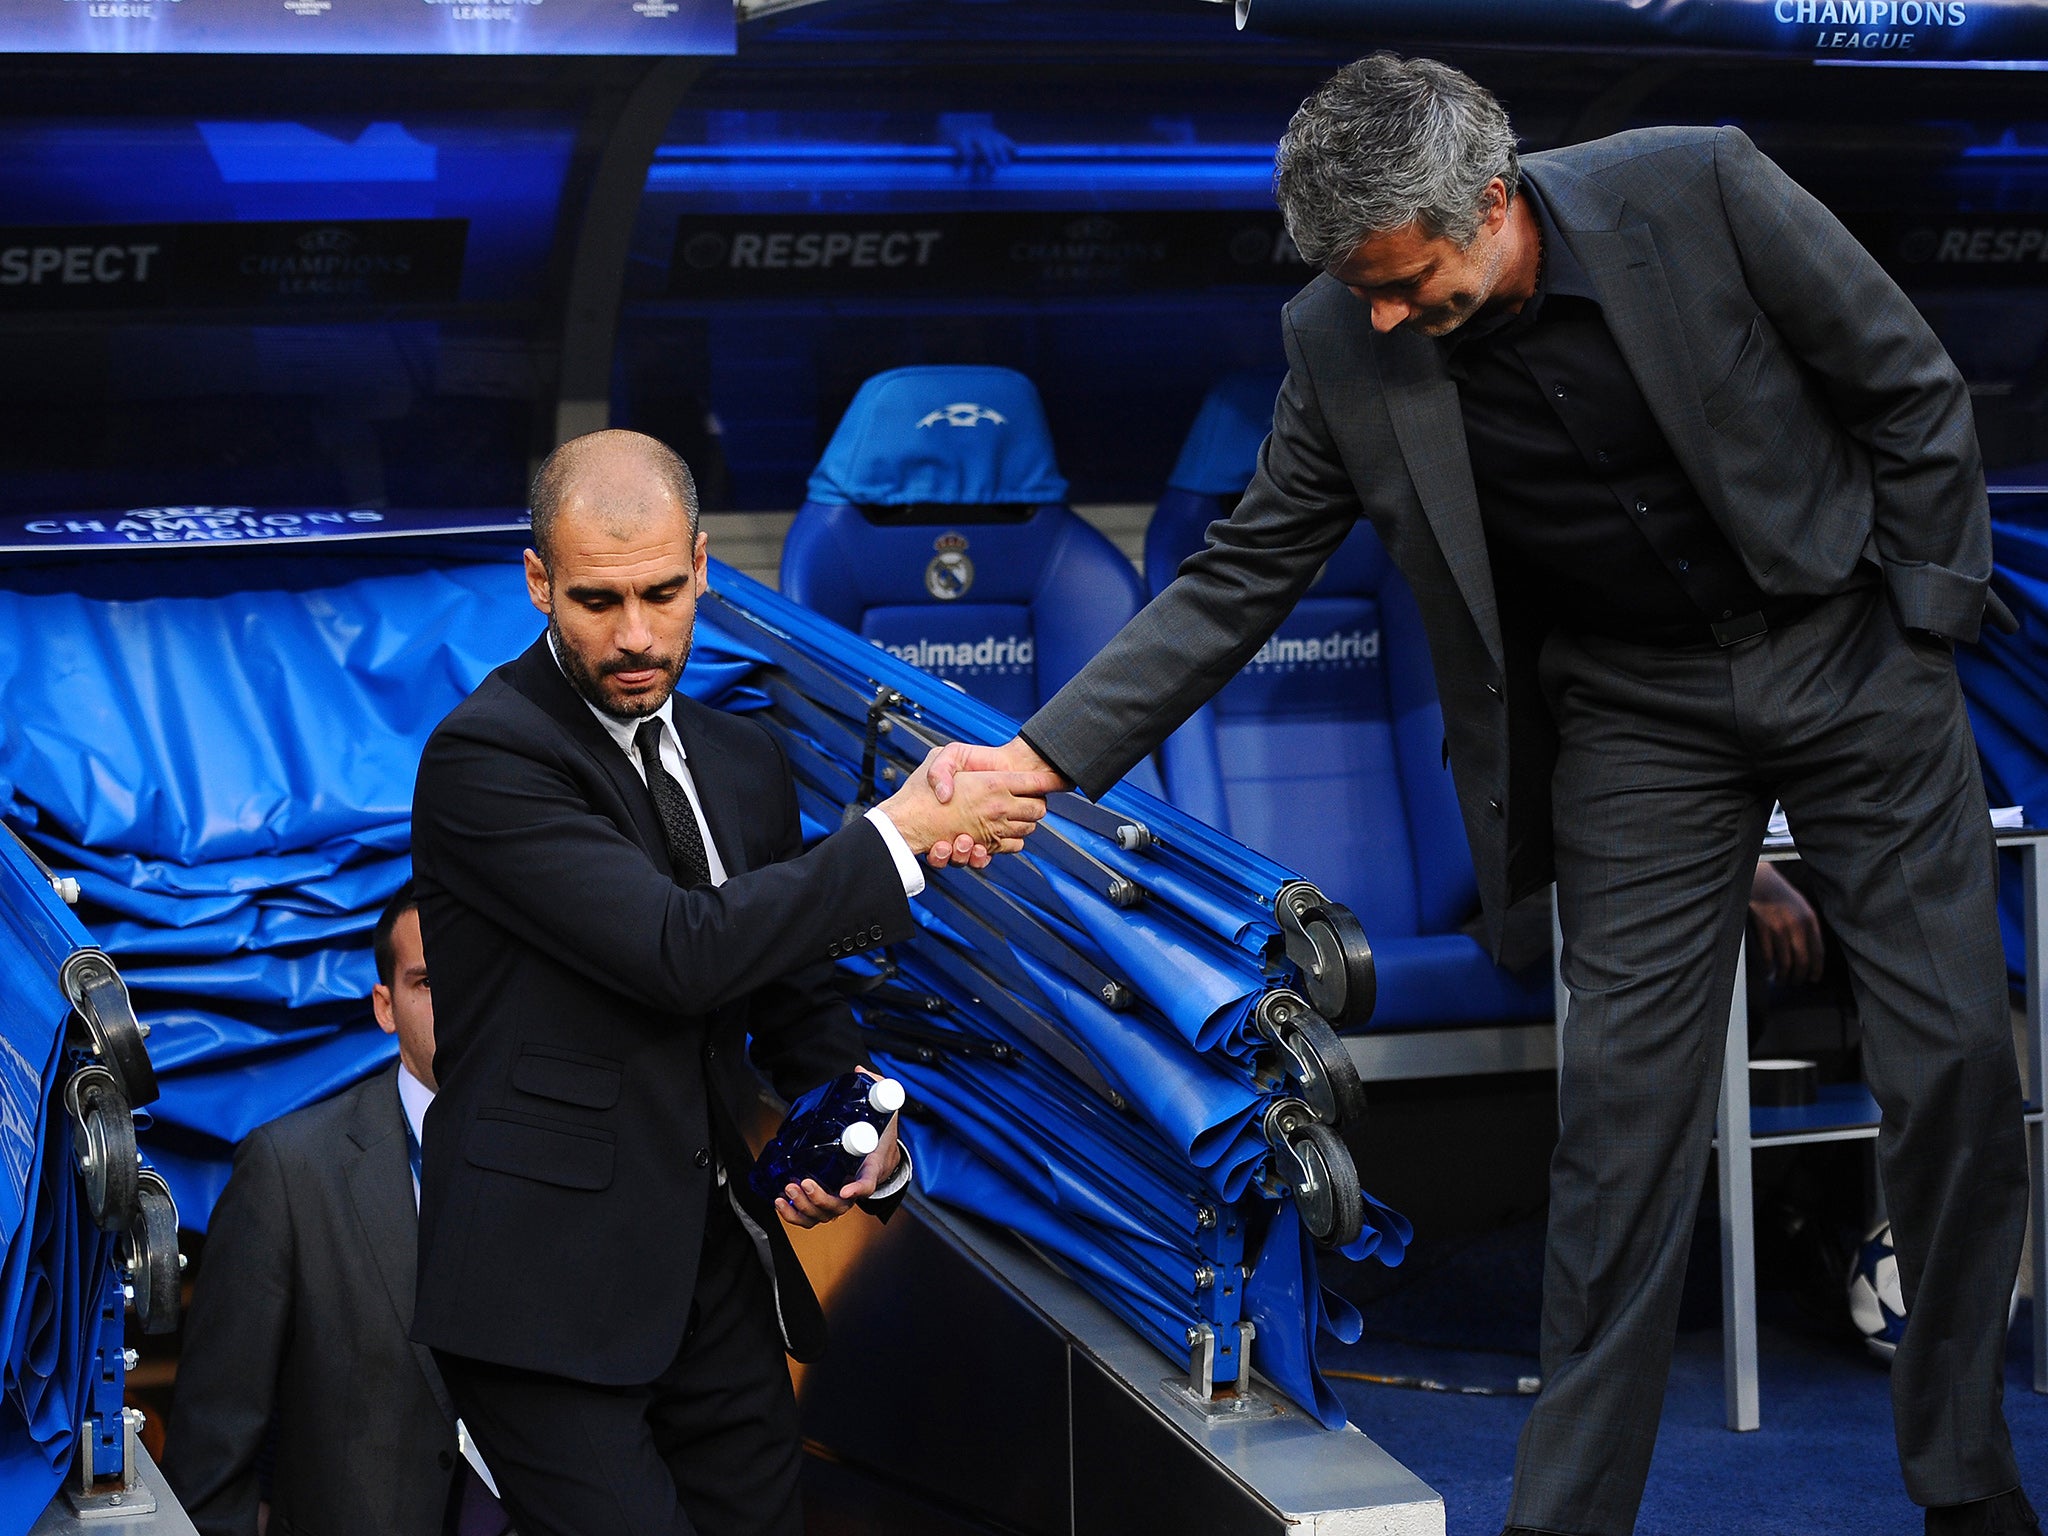 Barcelona's Pep Guardiola and Real's Jose Mourinho shake hands during their at times bitter rivalry in Spain